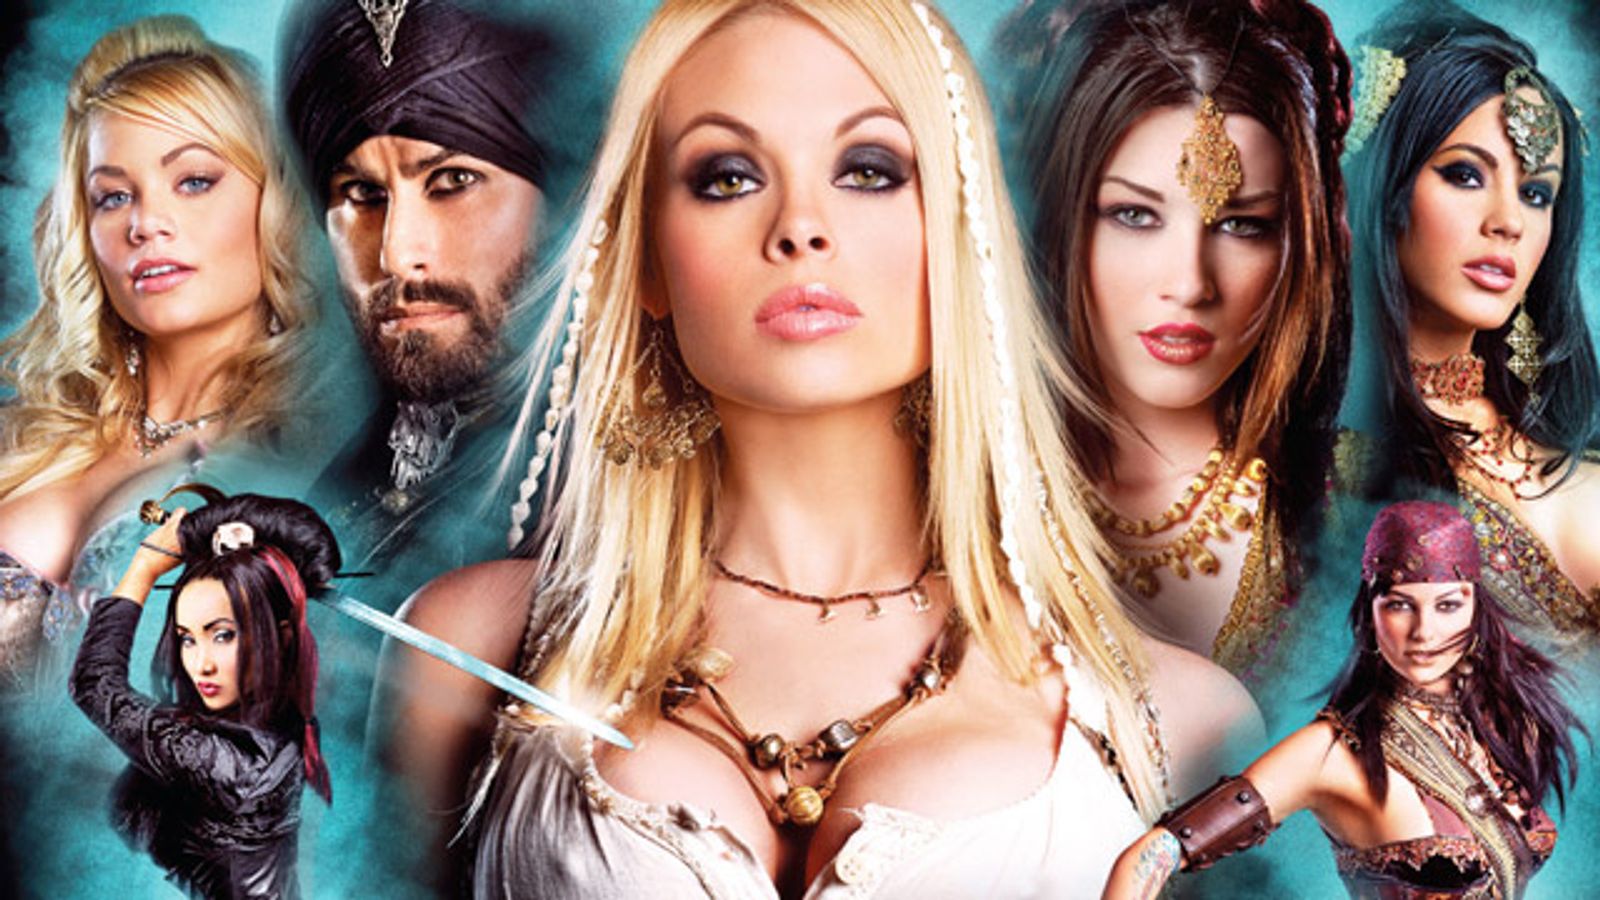 Pirates II' Receives R Rating from MPAA | AVN